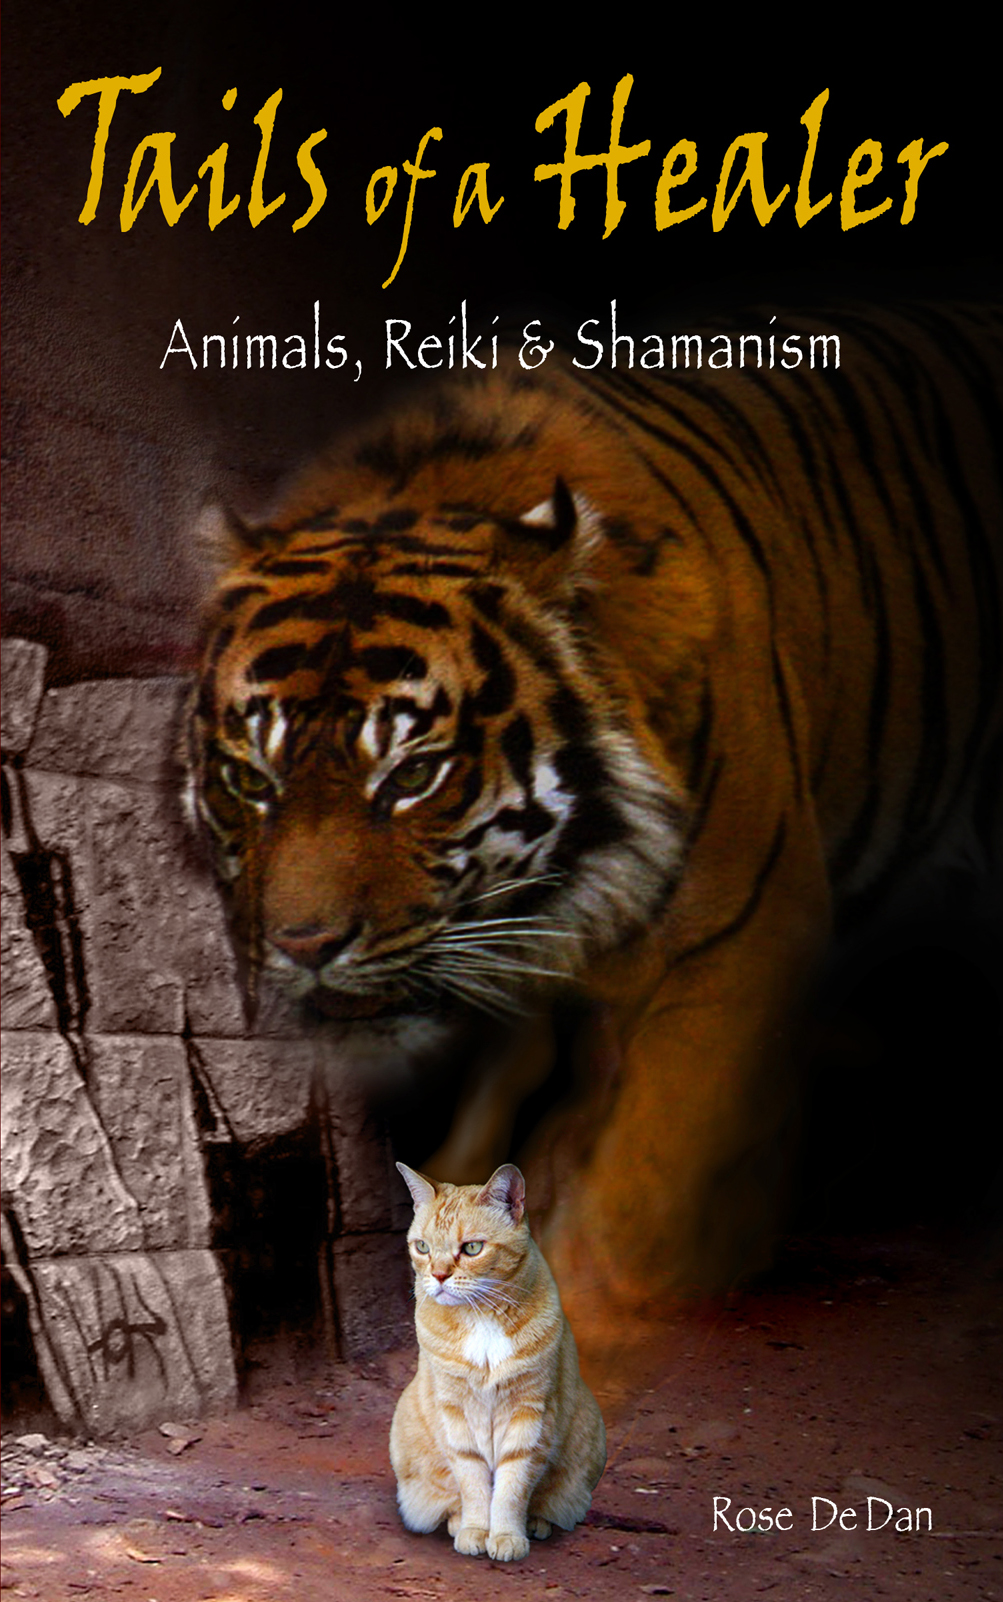 Tails of a Healer: Animals, Reiki and Shamanism978-1-4343-5501-0